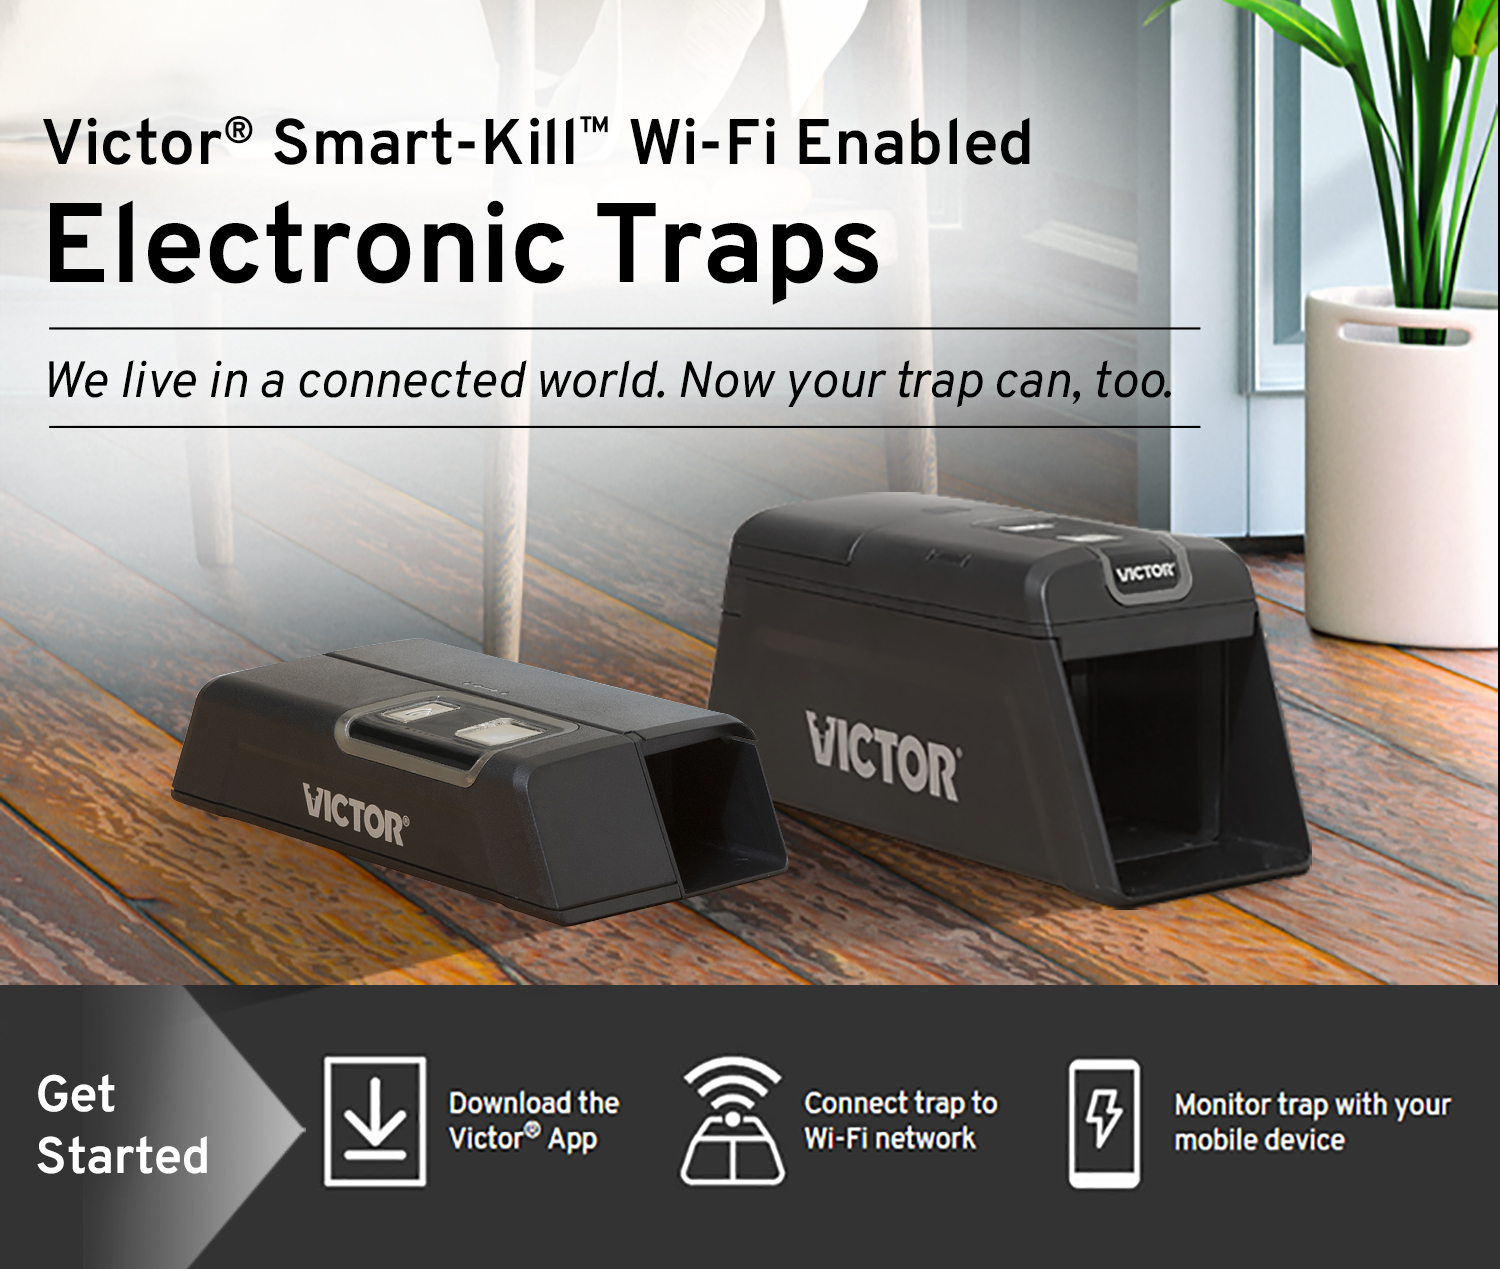 How to Connect the Smart-Kill Wi-Fi Electronic Rat Trap 